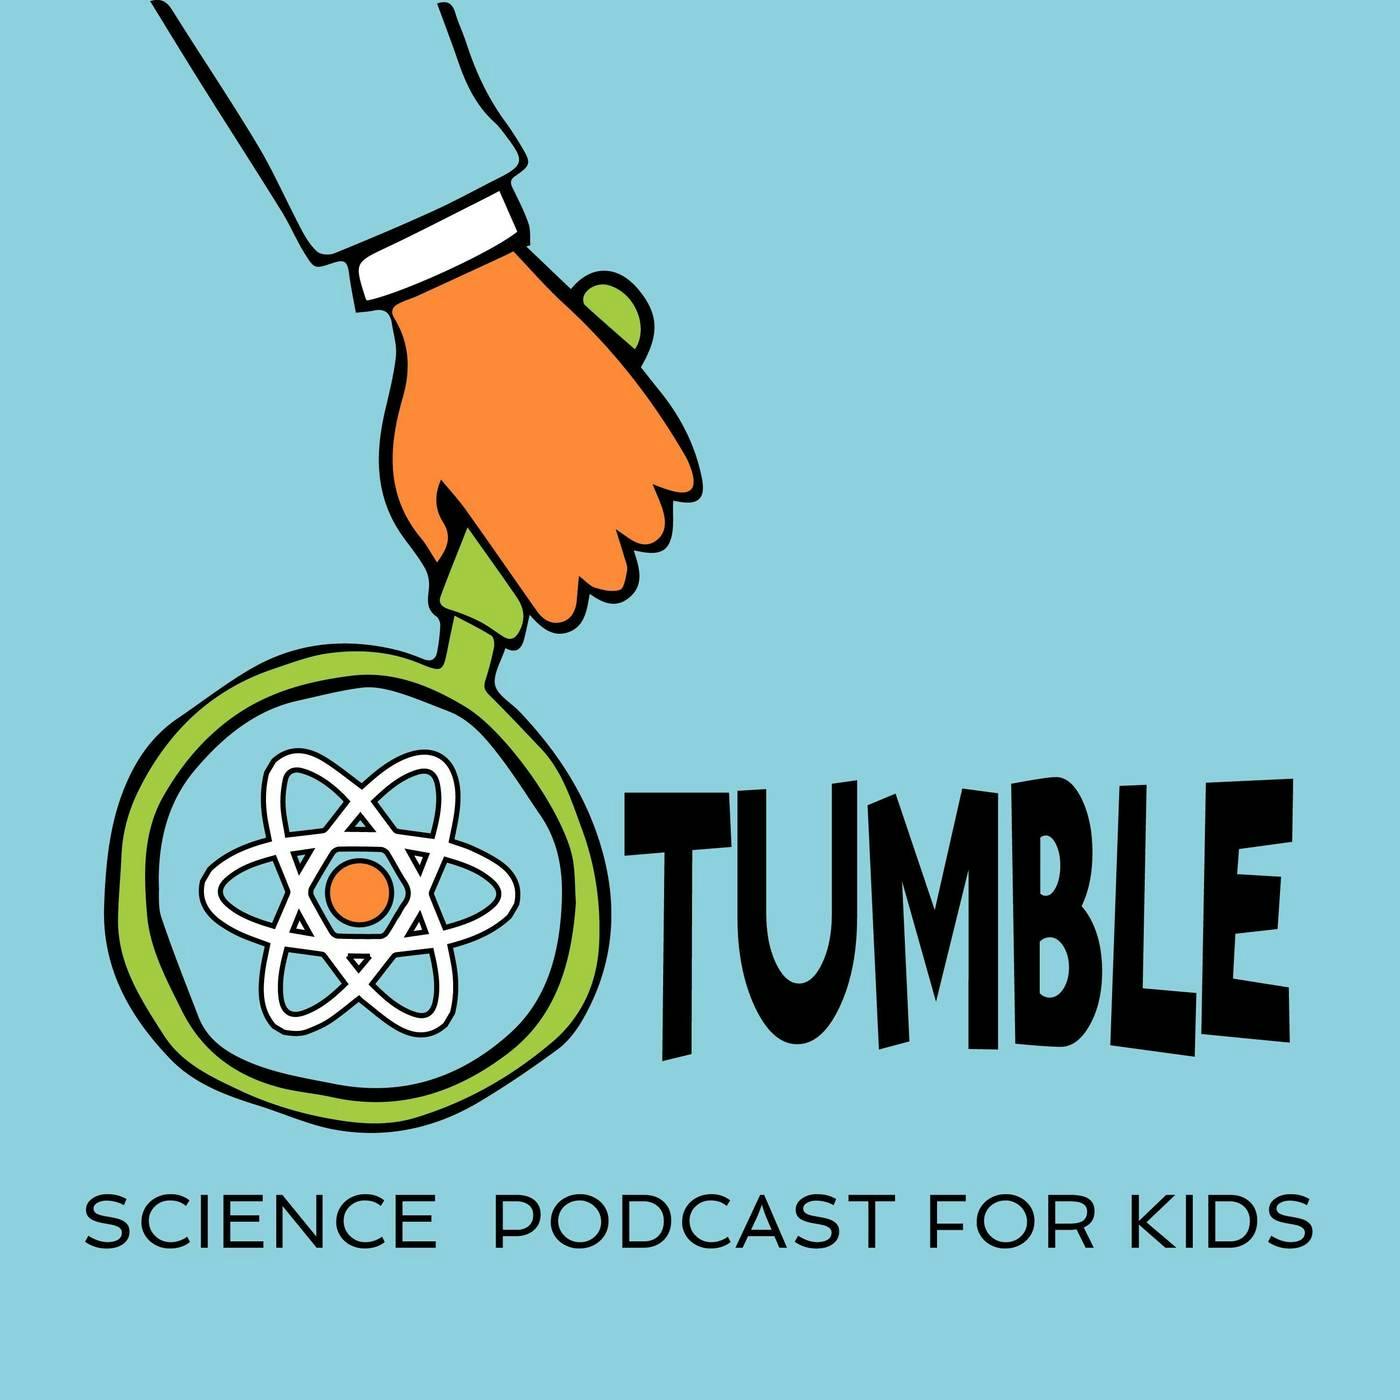 Tumble Science Podcast for Kids podcast show image